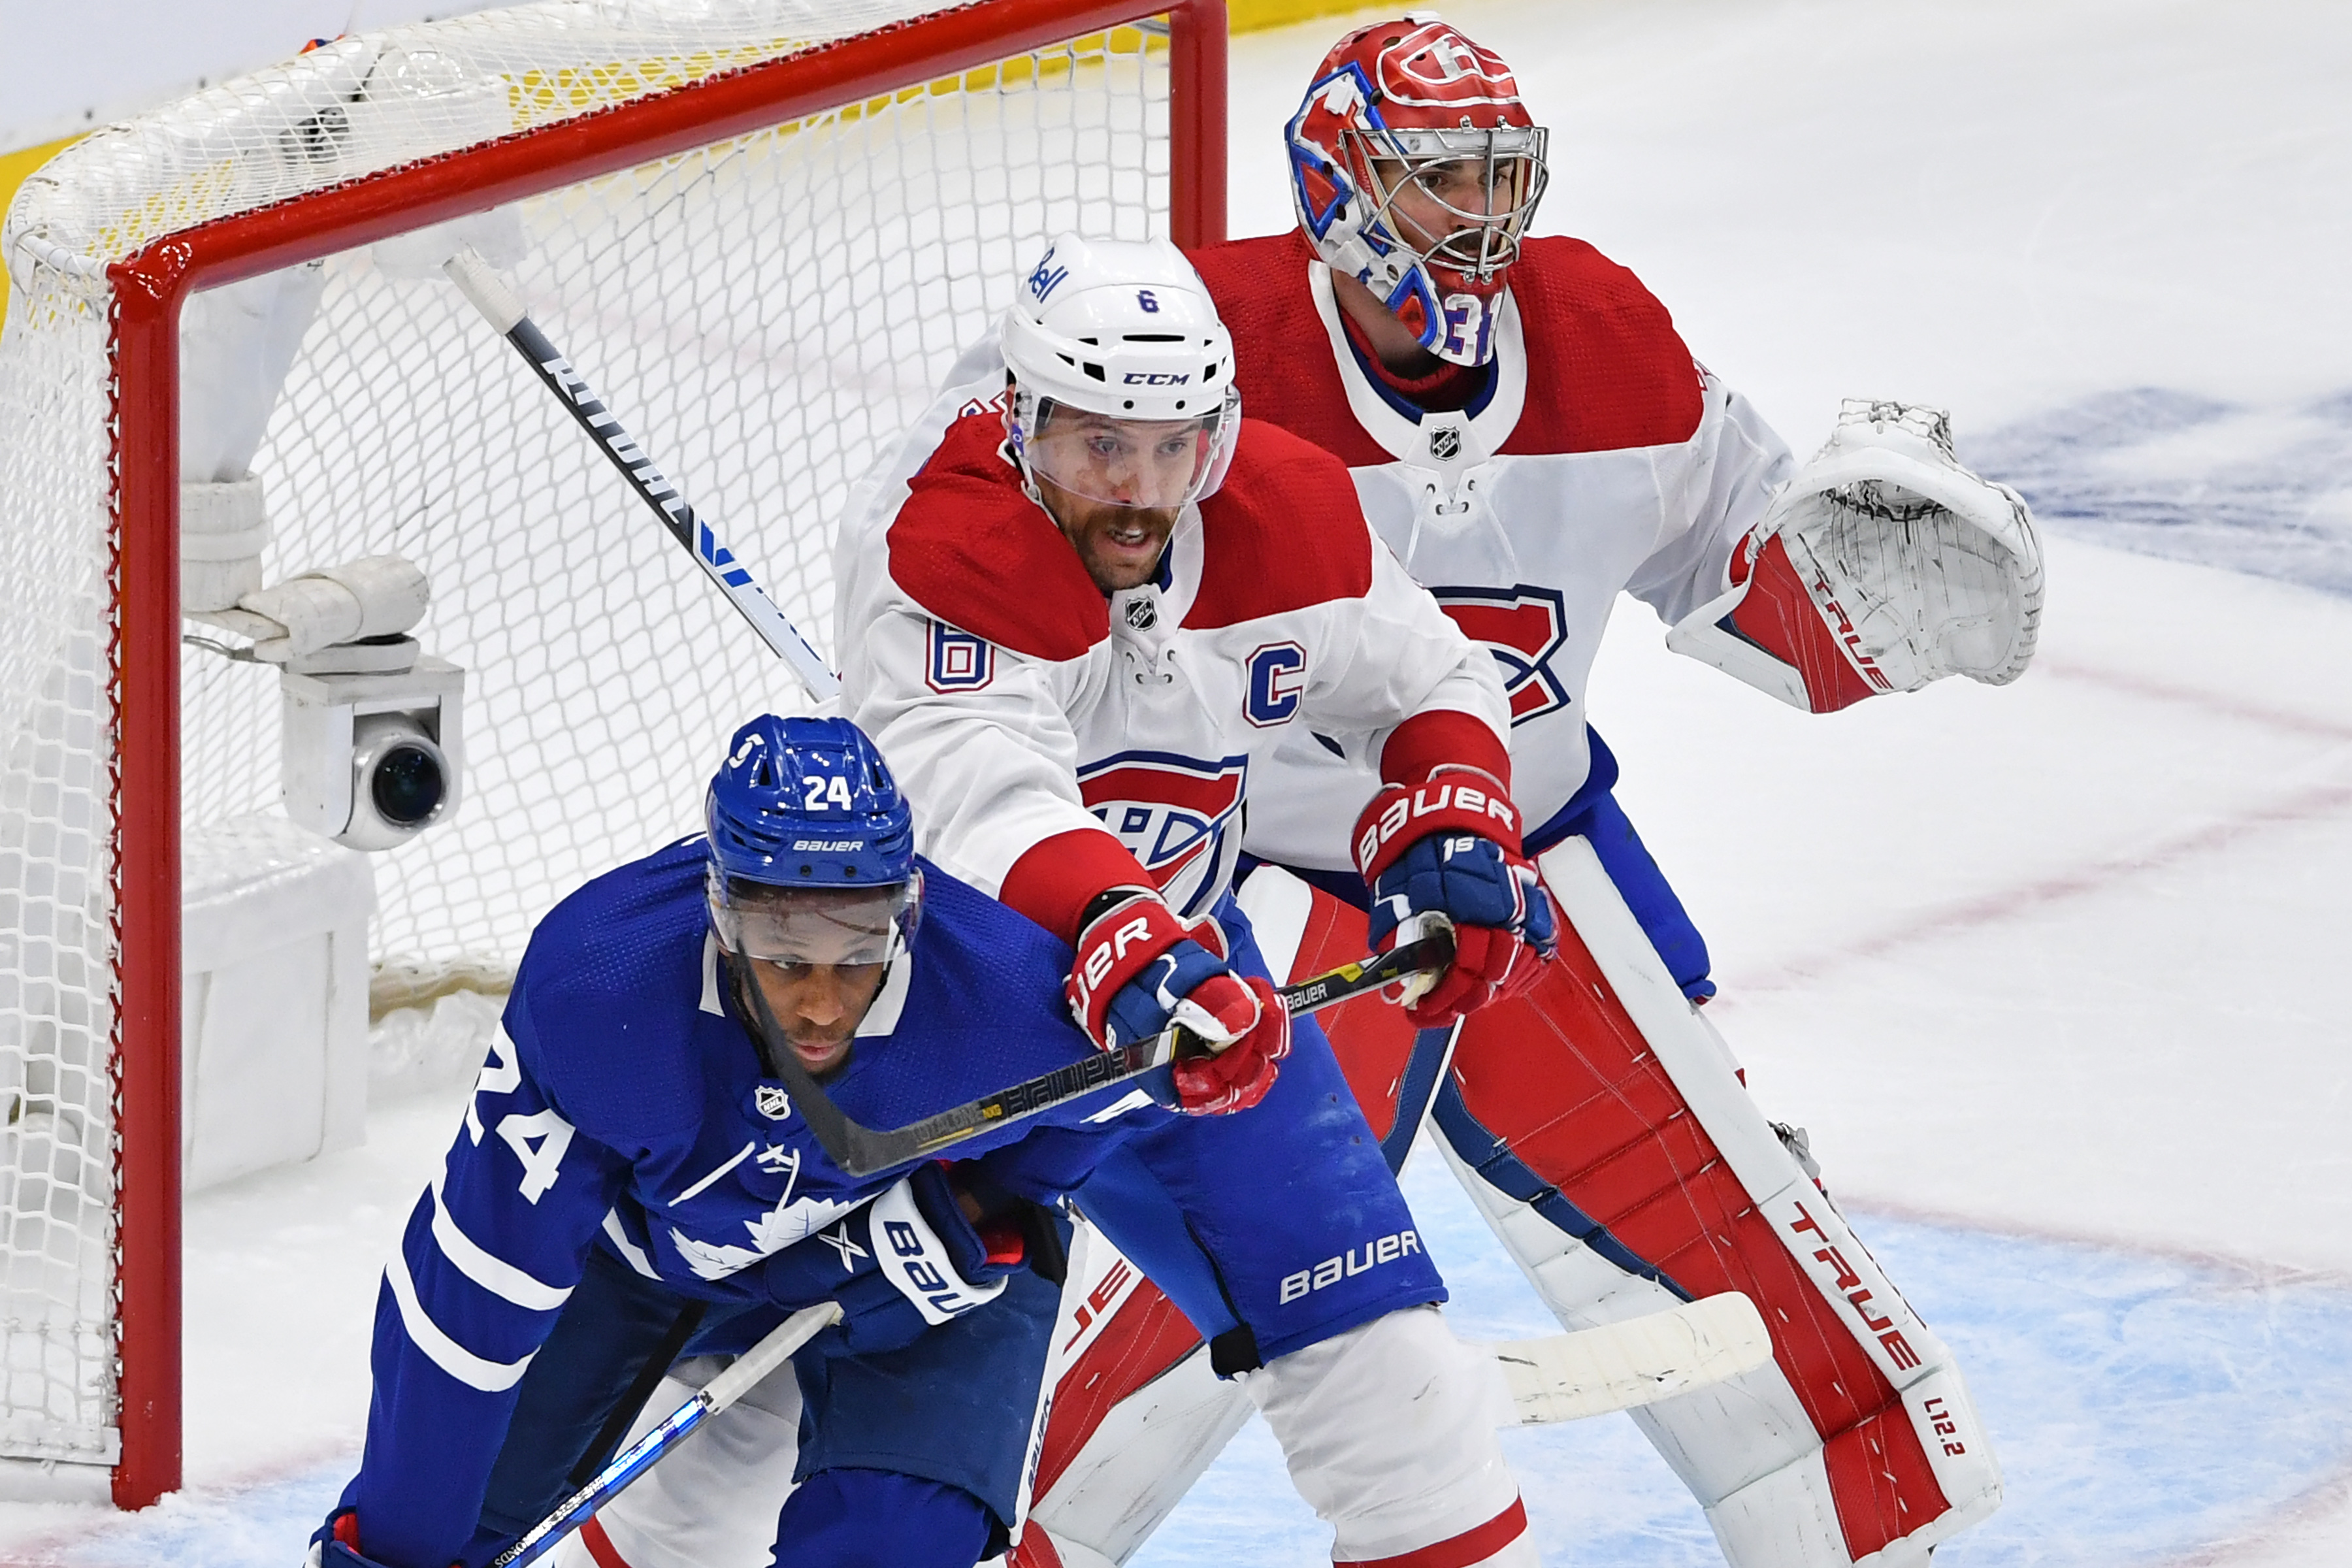 NHL: MAY 20 Stanley Cup Playoffs First Round - Canadiens at Maple Leafs